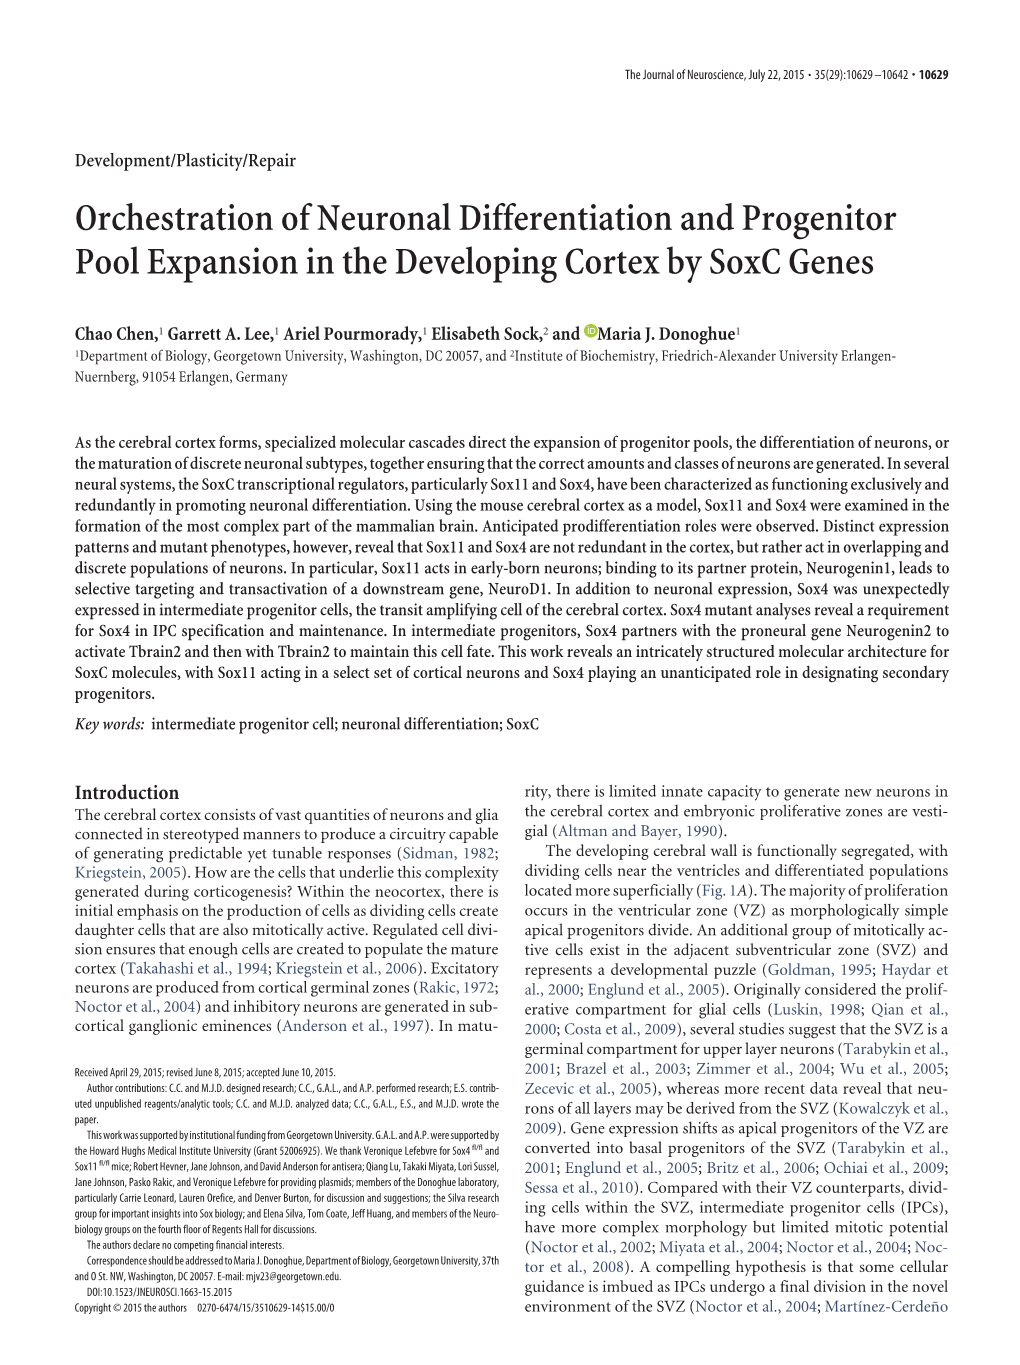 Orchestration of Neuronal Differentiation and Progenitor Pool Expansion in the Developing Cortex by Soxc Genes